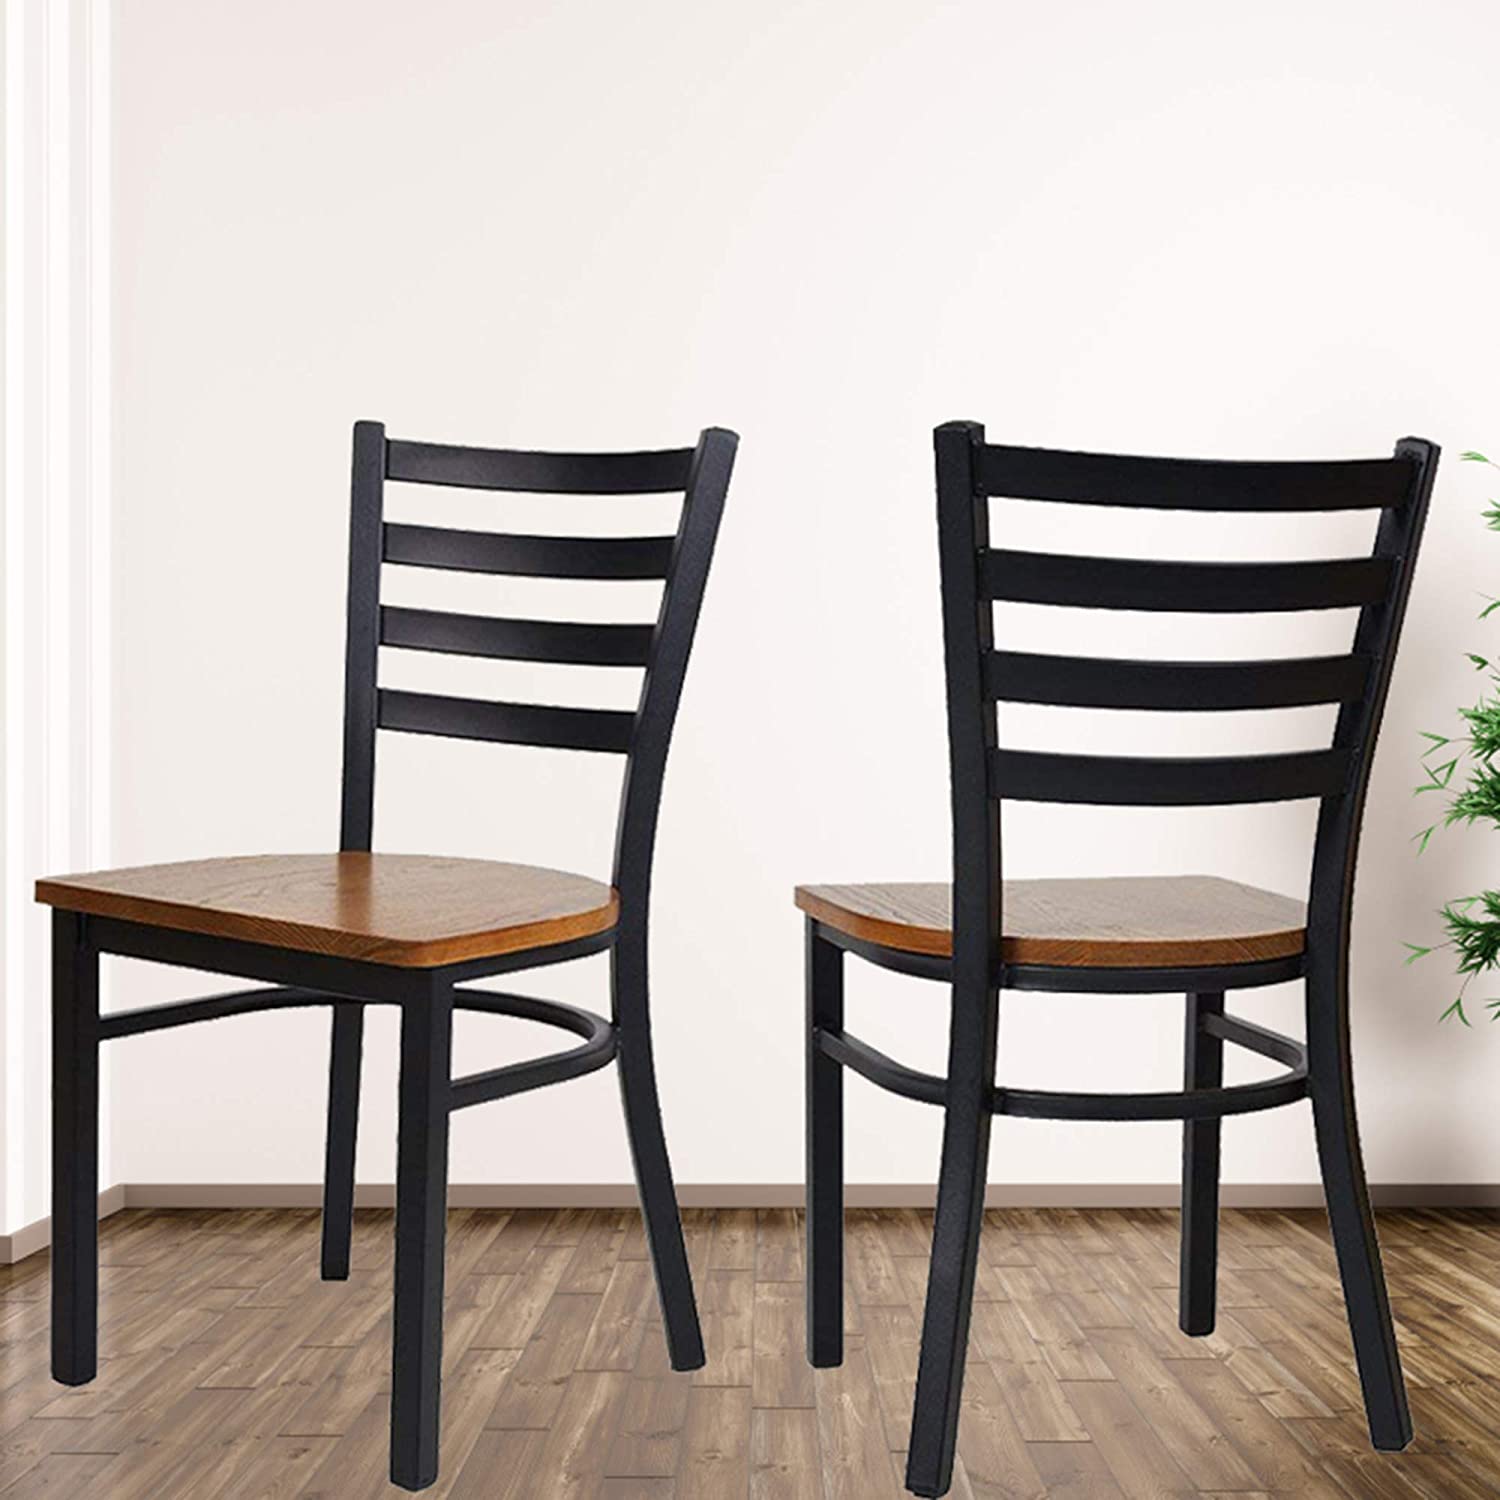 Set of 2 Kitchen Dining Chairs Wood Seat with Metal Legs Fully Assembled, Ladder Back